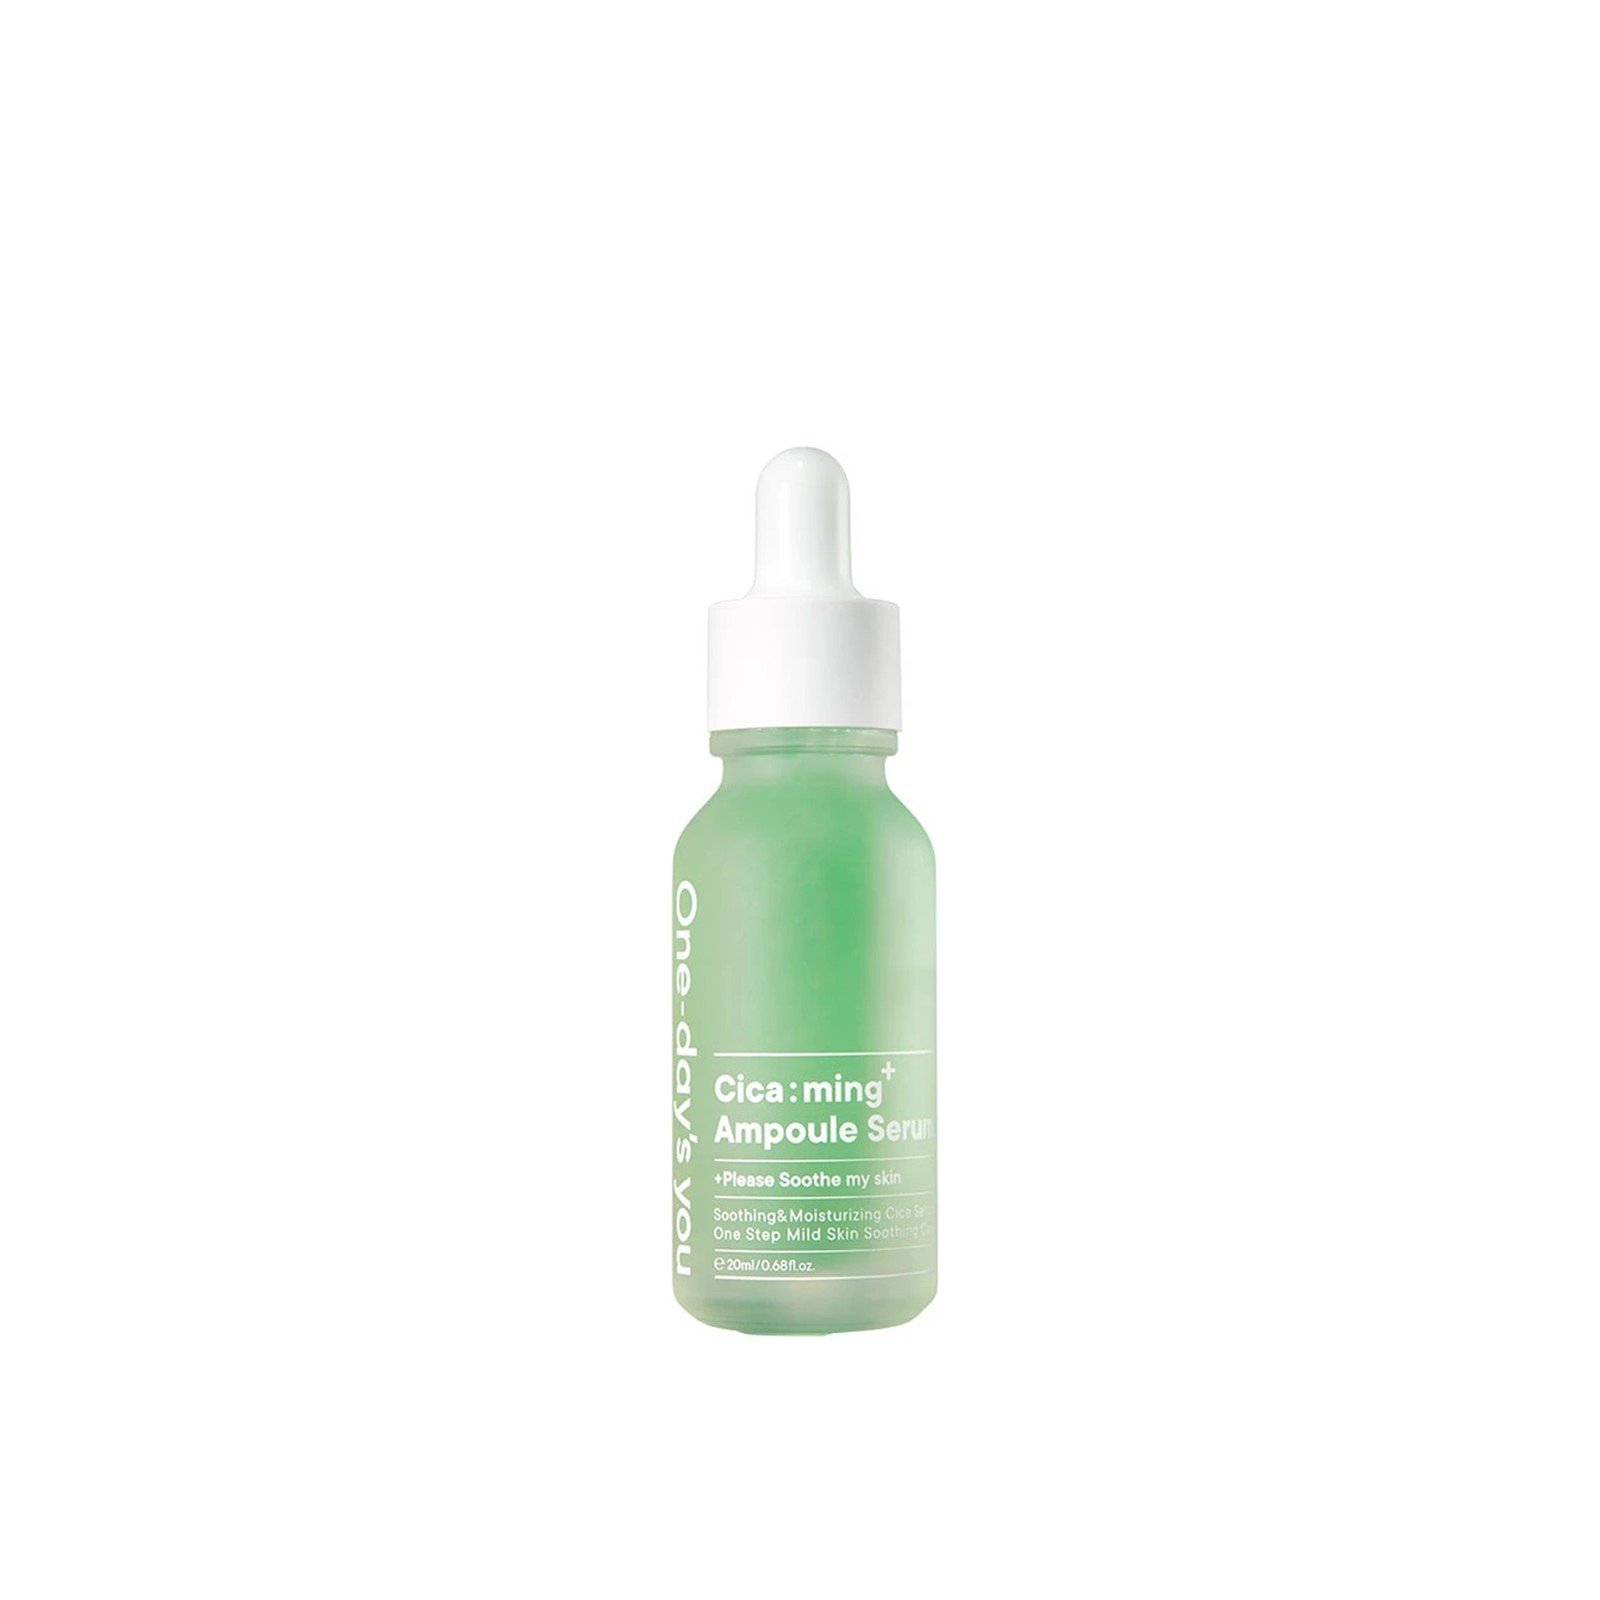 One-day's you Cica:ming Ampoule Serum 30ml (1.01 fl oz)